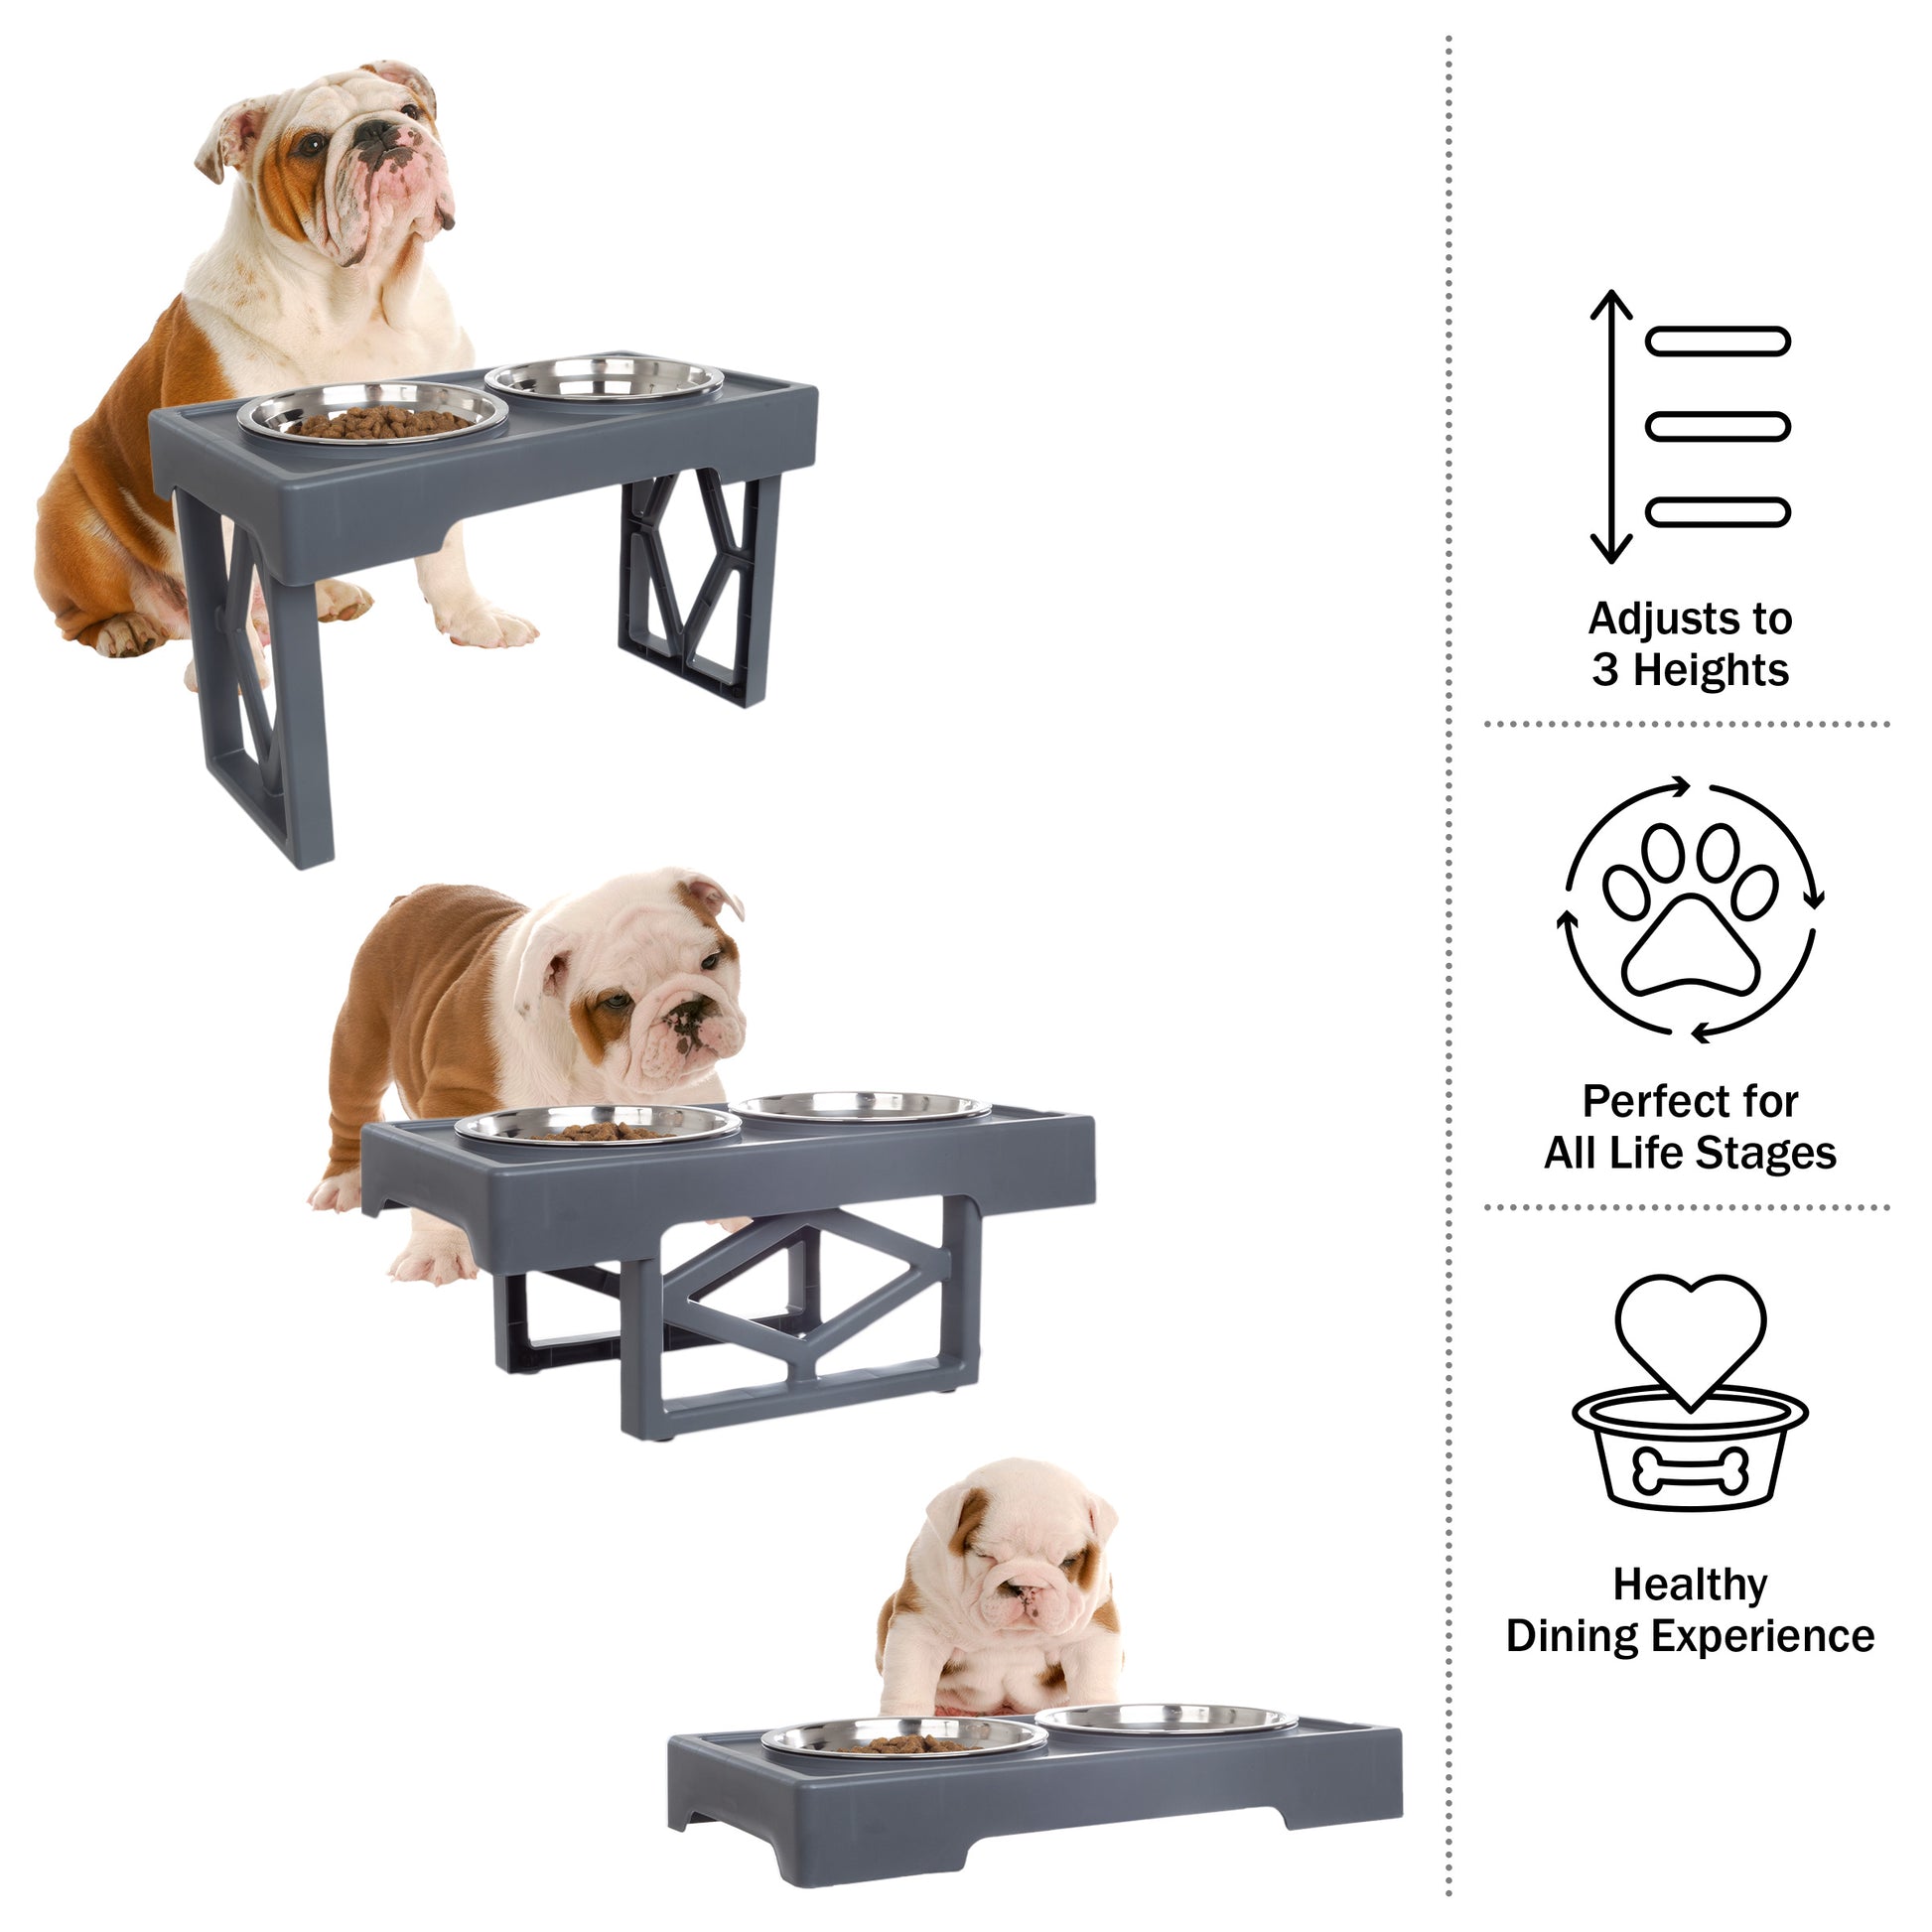 Stainless 3 Adjustable Heights Elevated Dog Bowl Adjustable